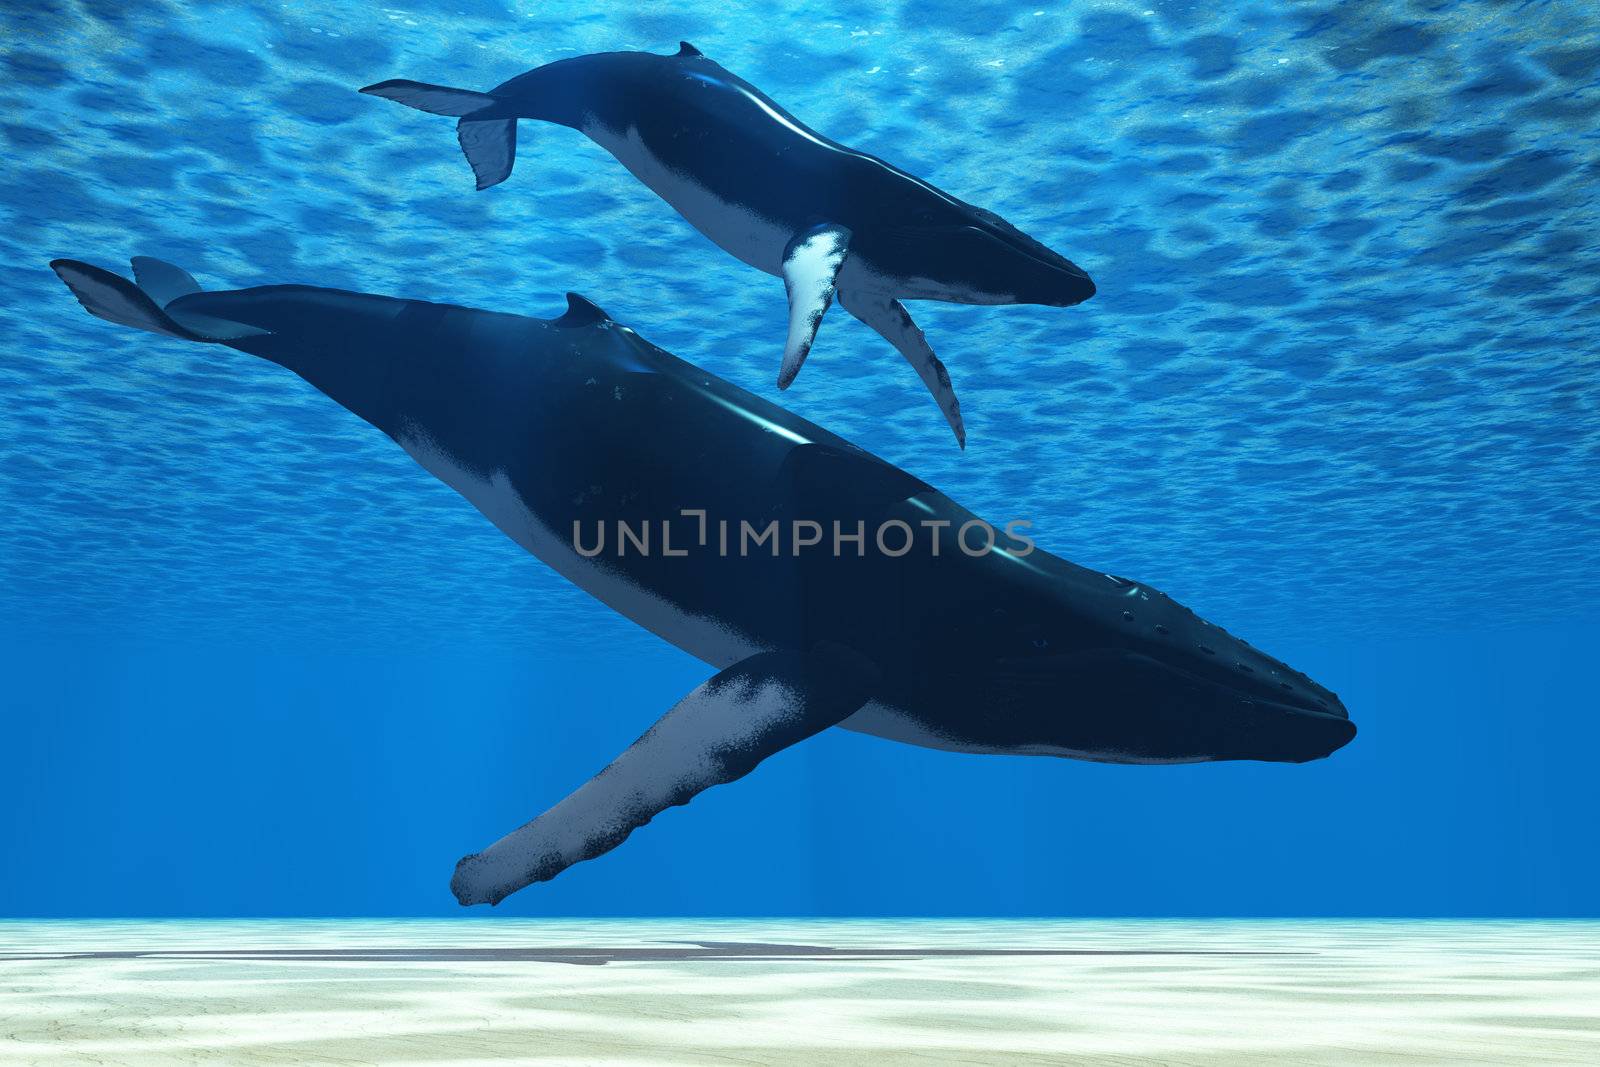 A Humpback mother whale escorts her calf in the shallows of the ocean.